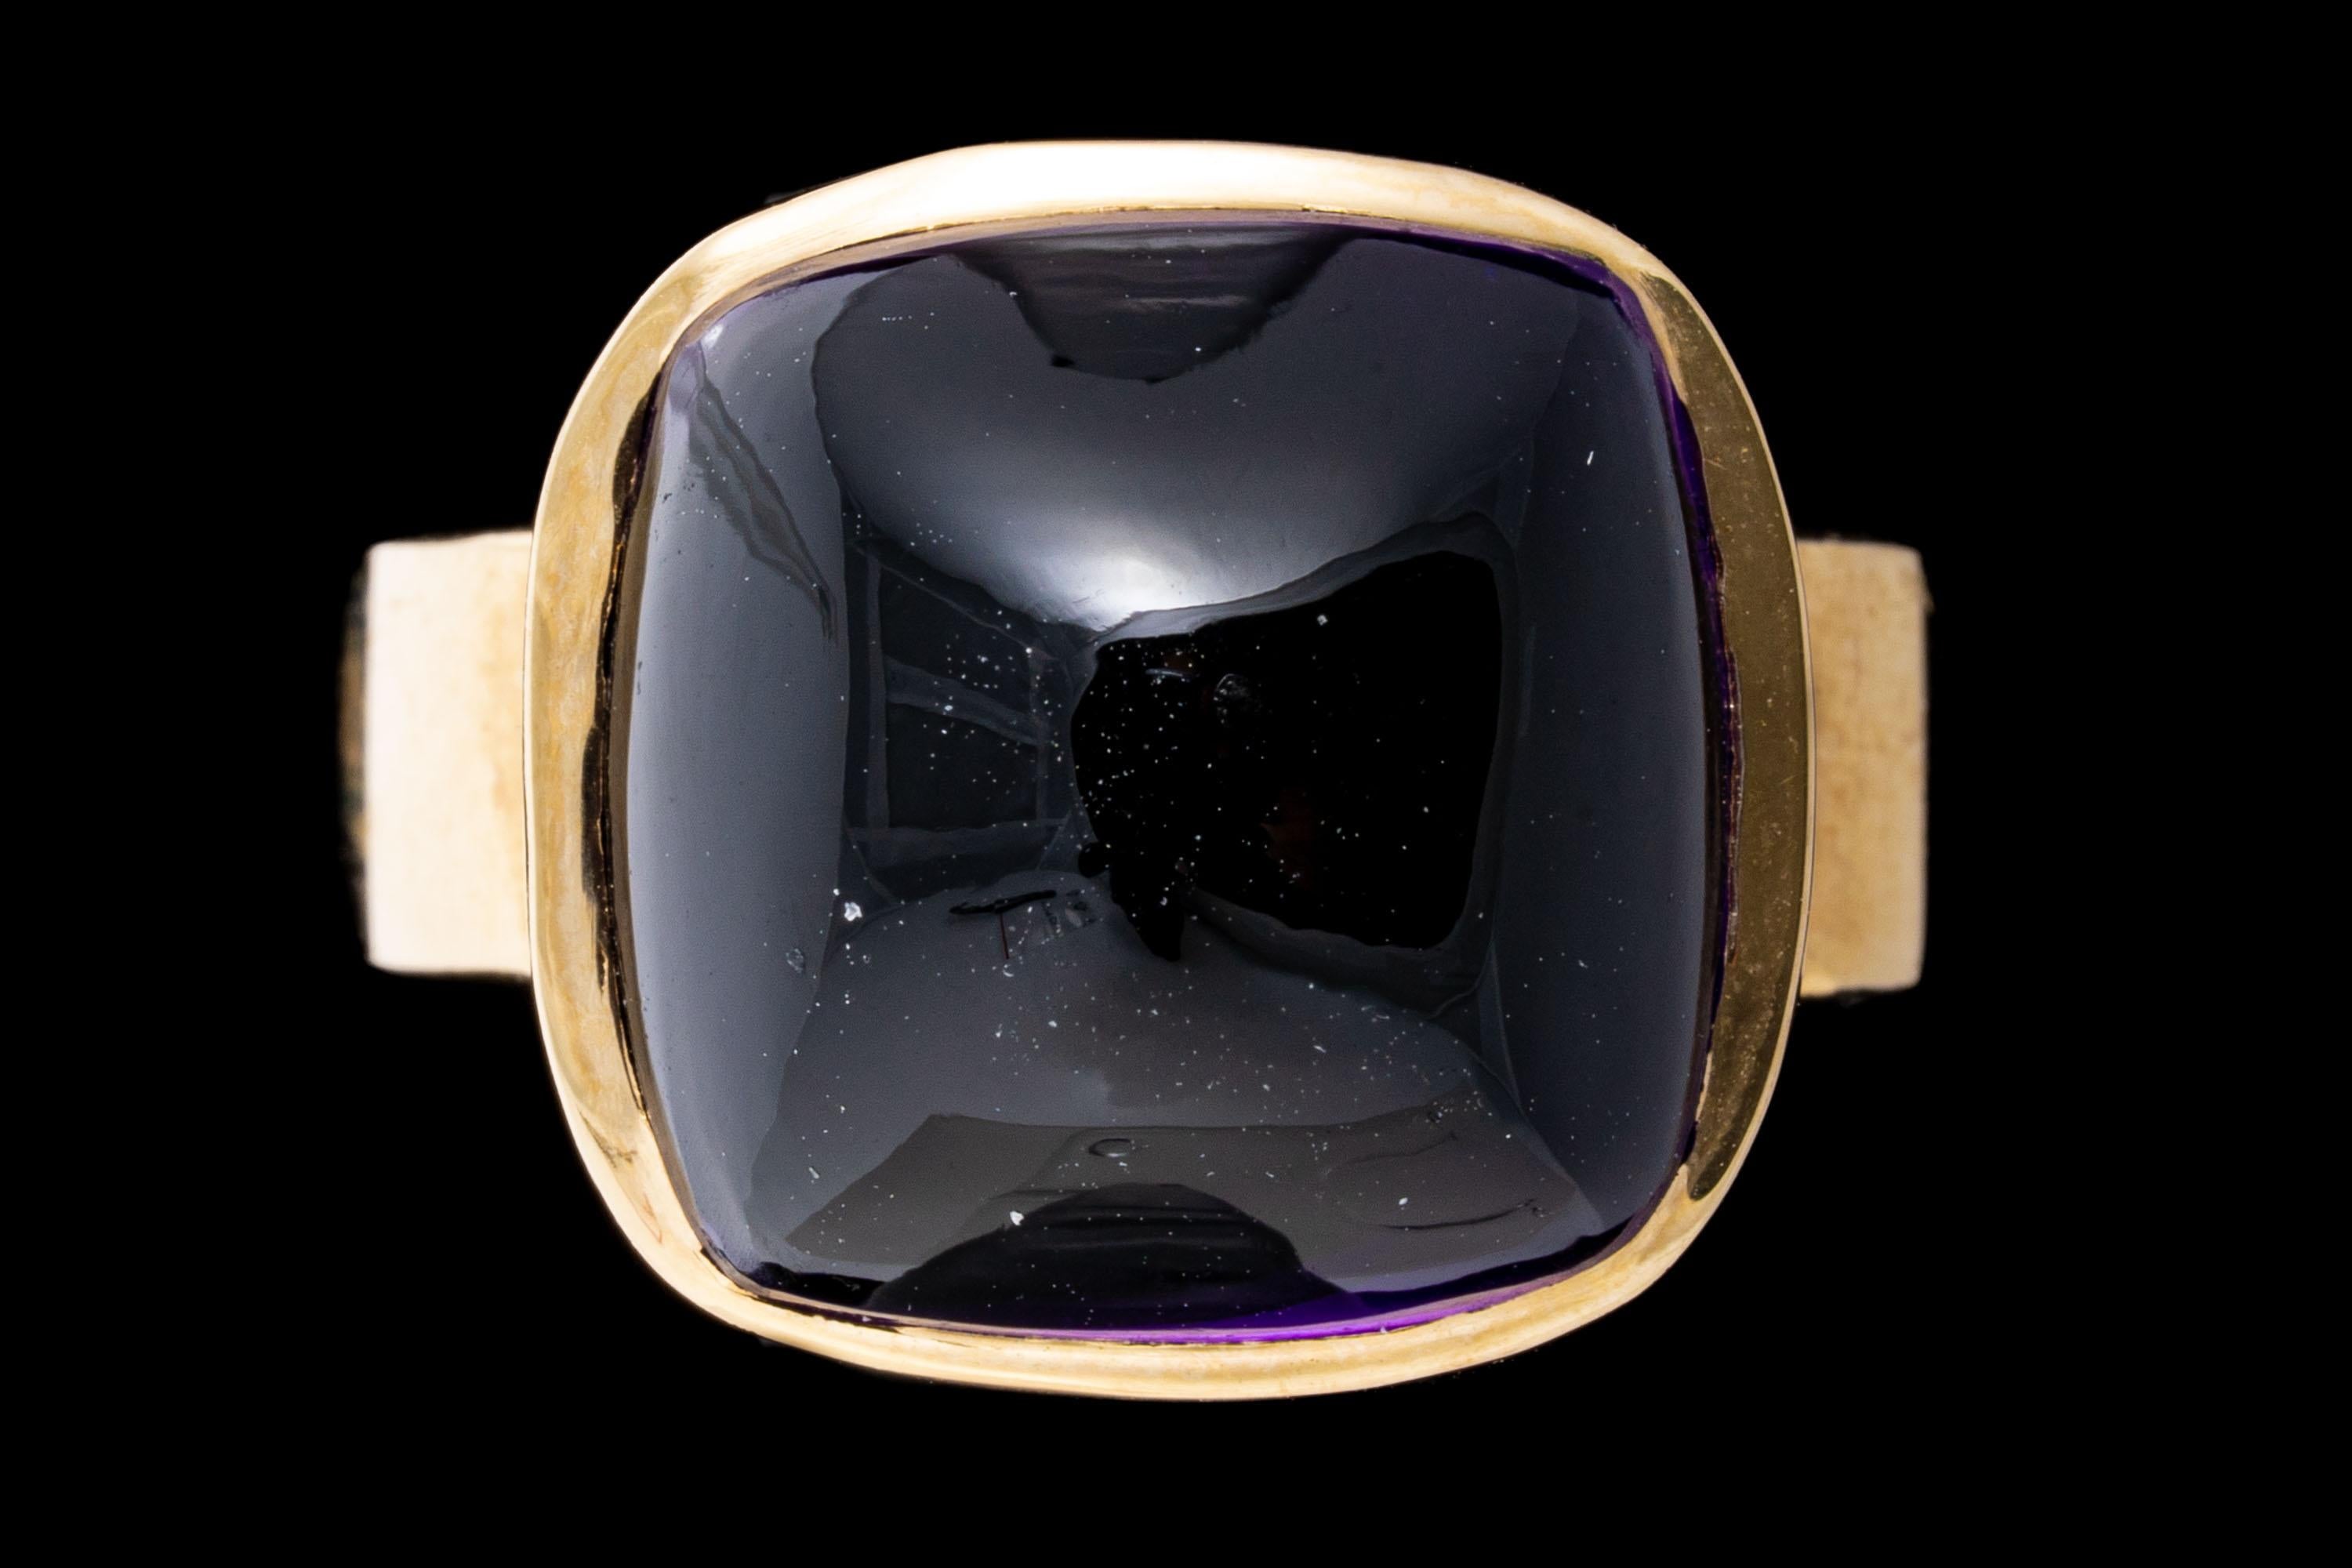 14k yellow gold ring. This lovely ring has a square sugarloaf cabochon cut dark purple color amethyst center, bezel set atop a modern profile, and wide, high polished yellow gold band.
Marks: 14k
Dimensions: 9/16